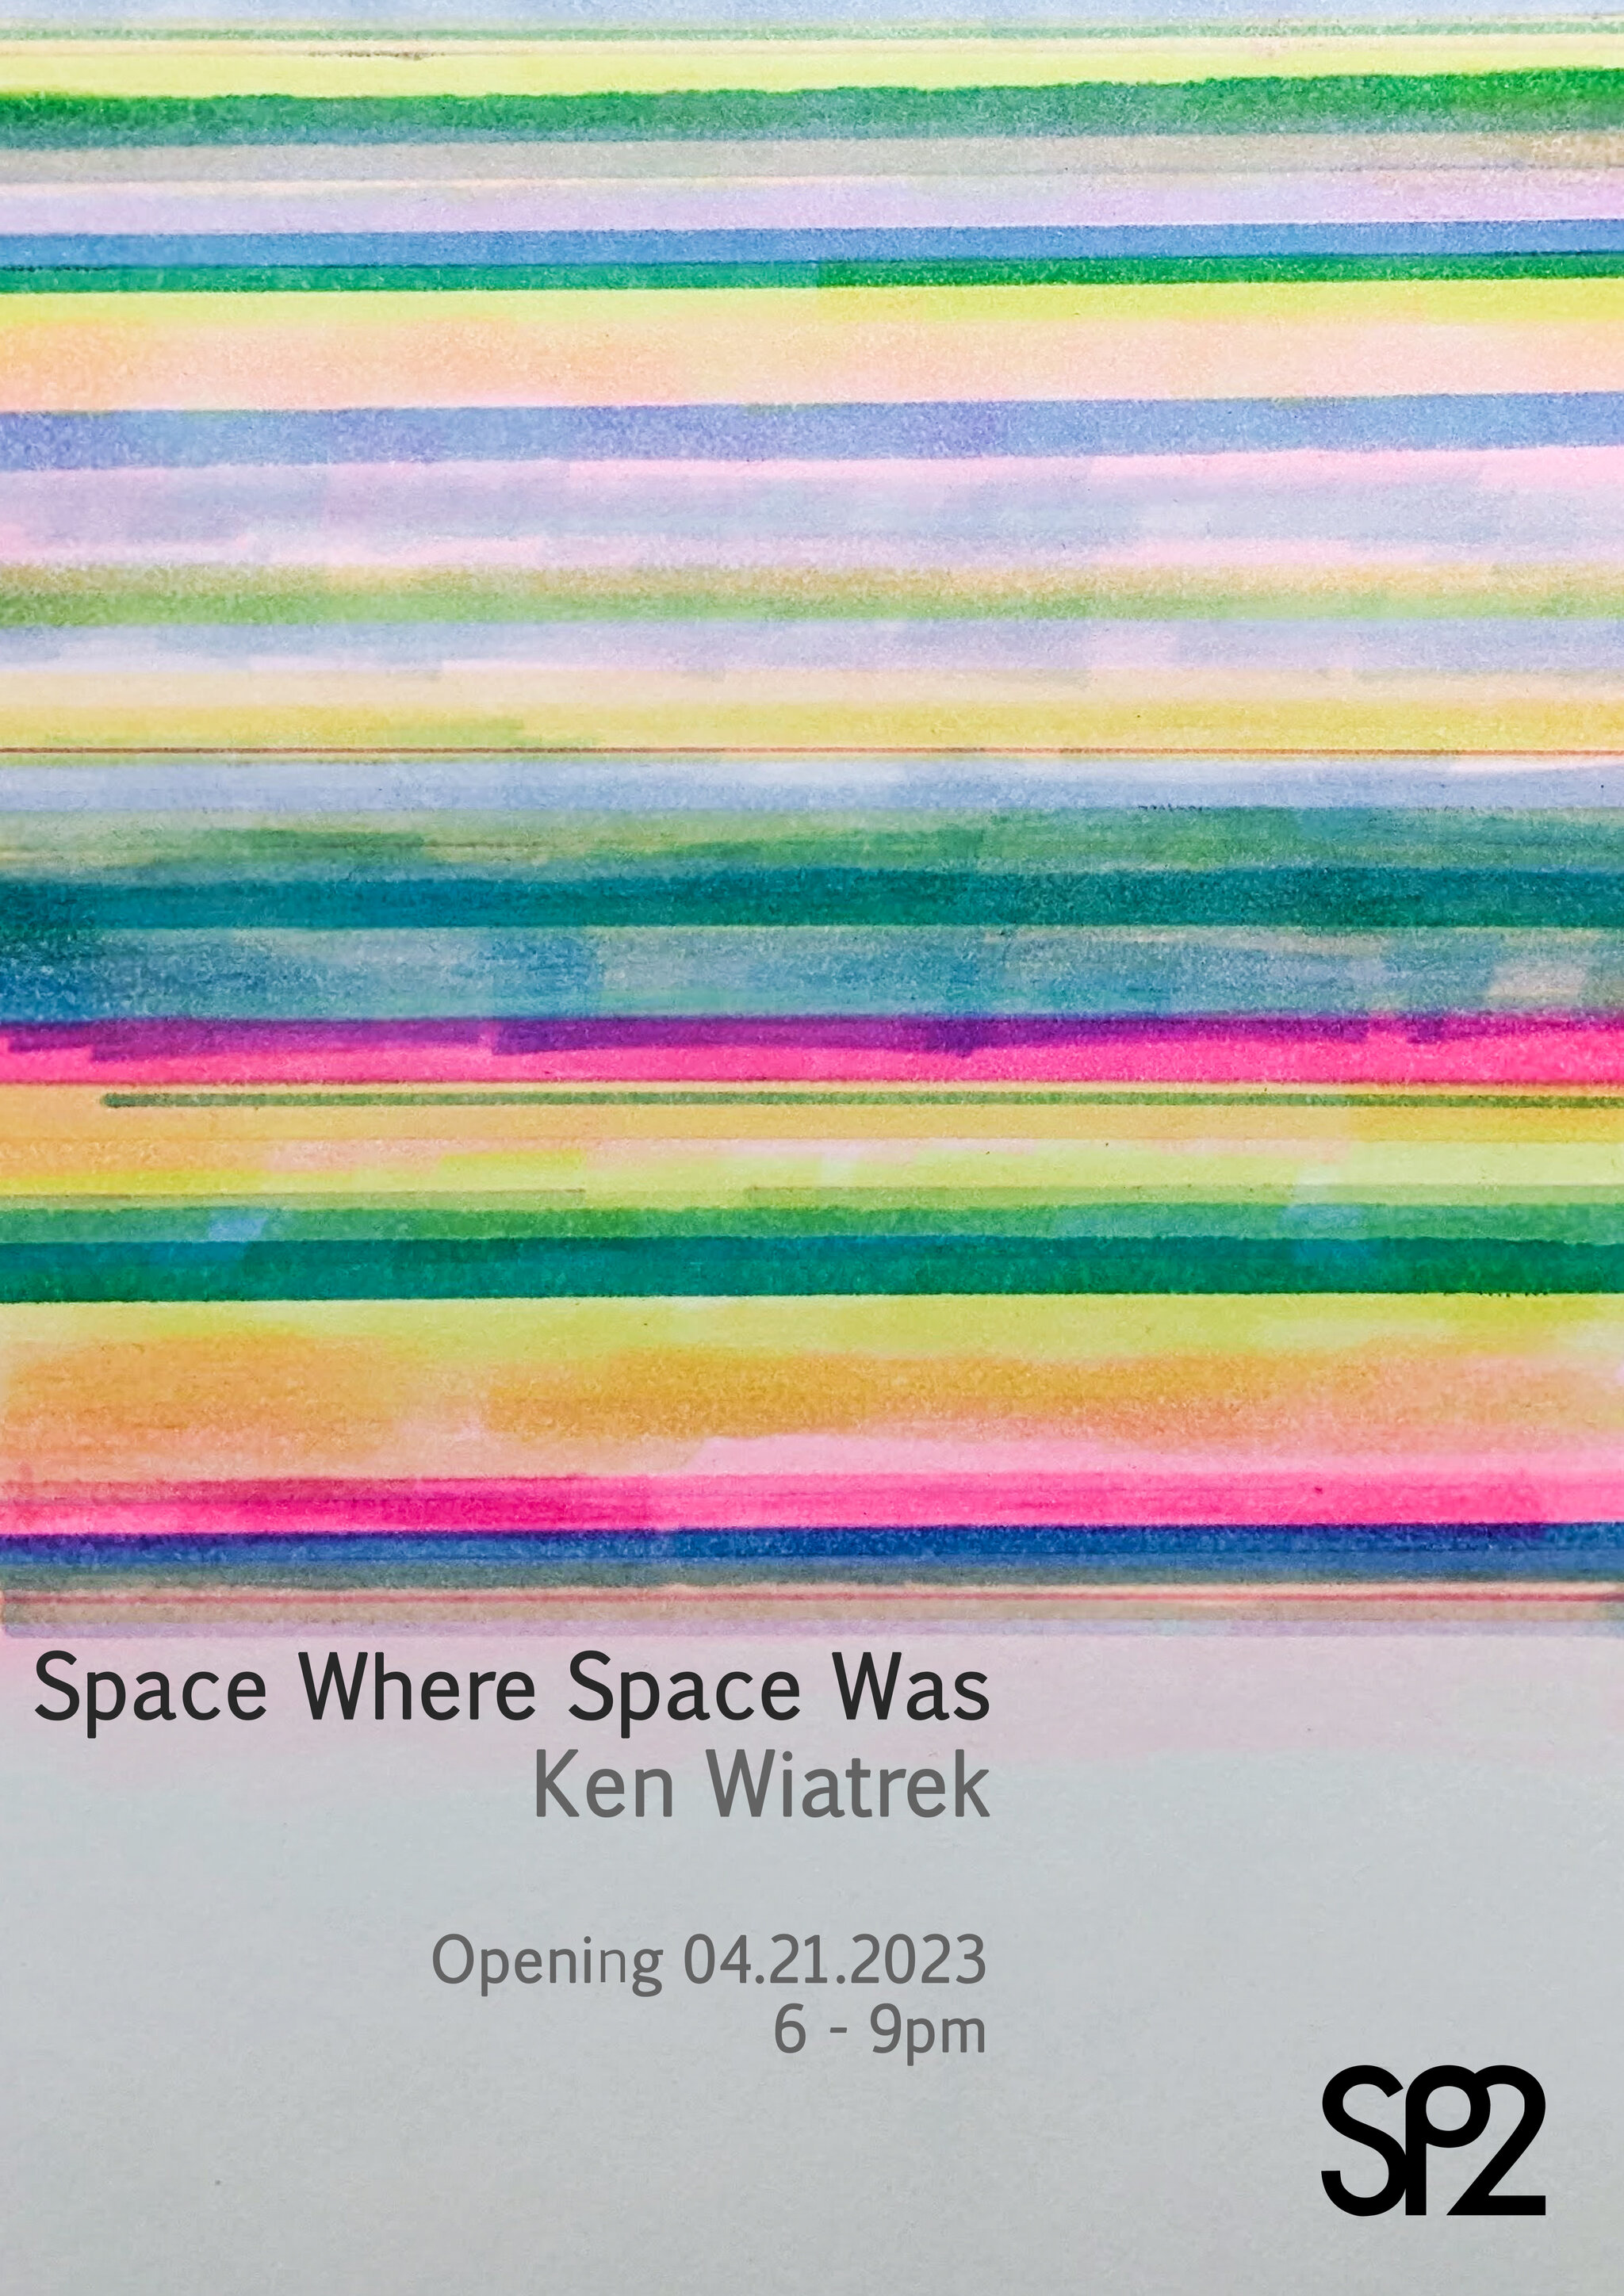 kenconsumer, "Space Where Space Was" poster